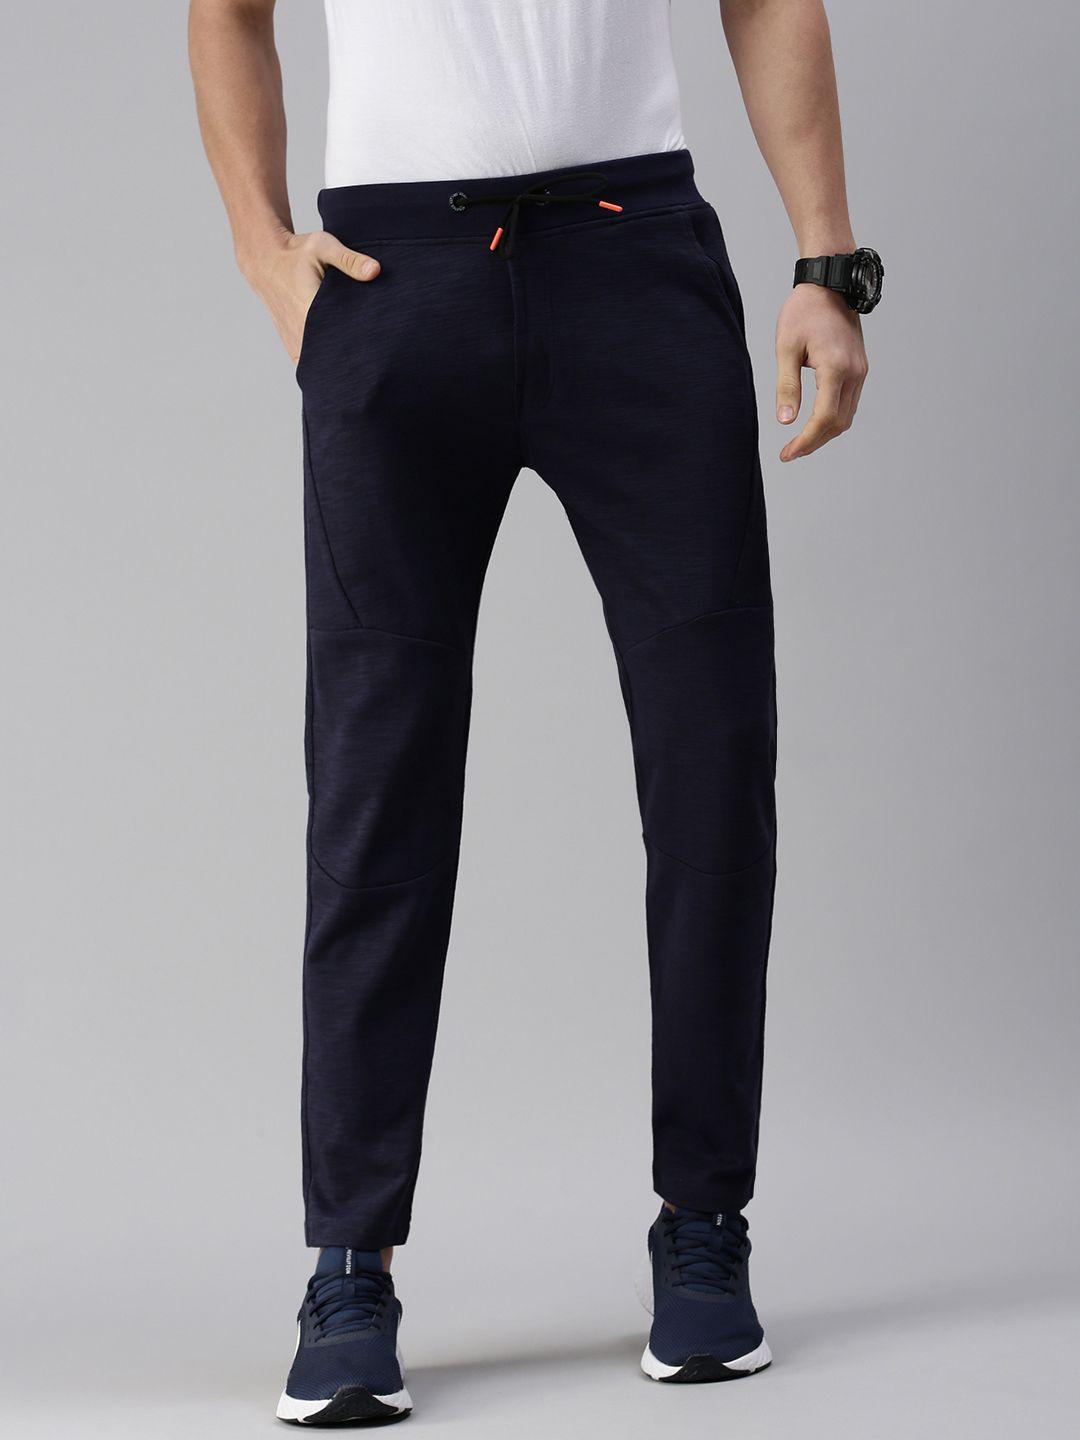 showoff men navy blue solid straight fit cotton track pants